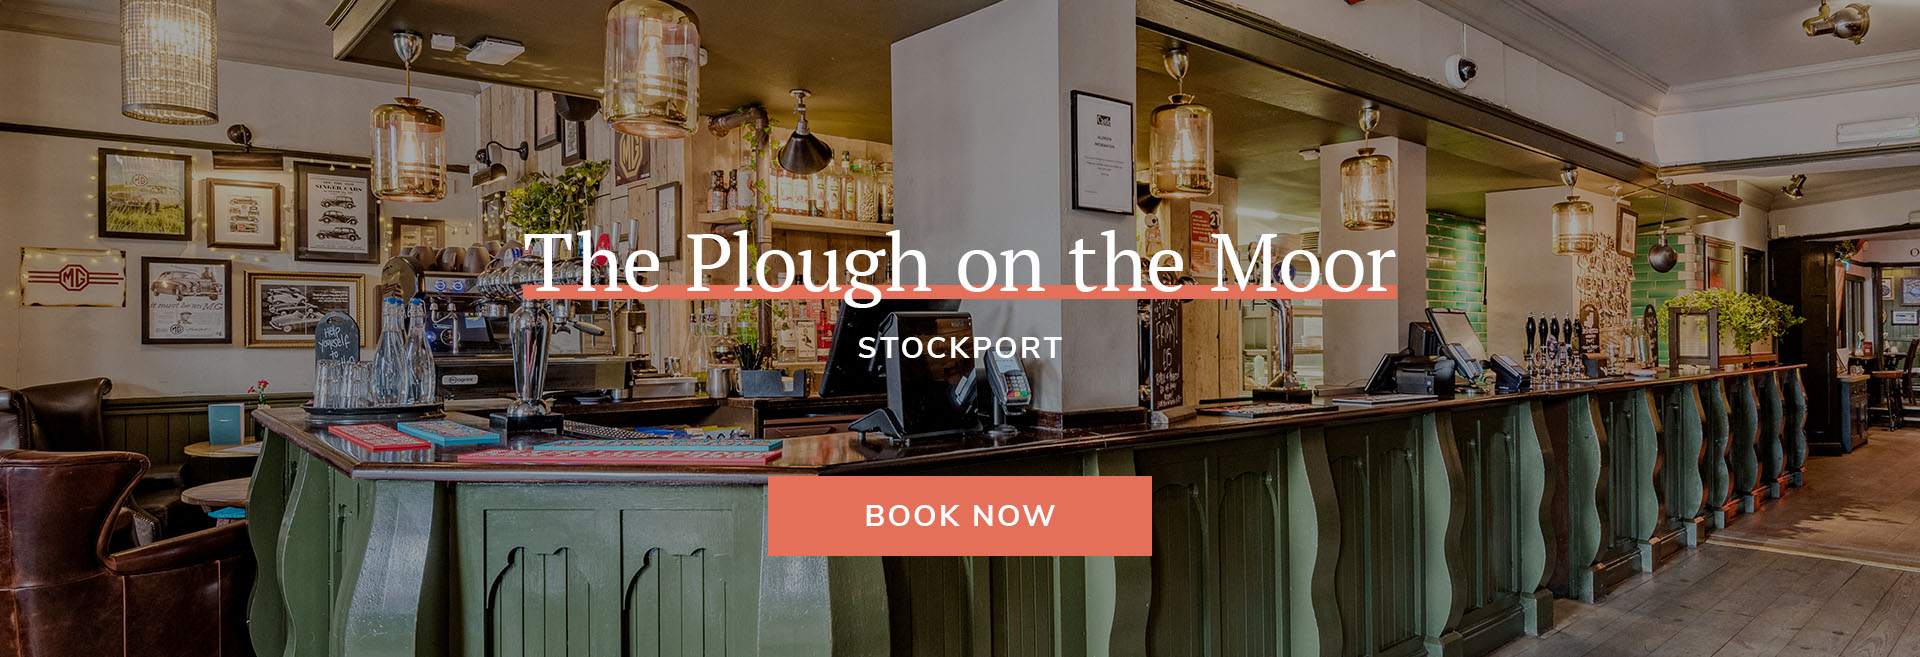 The Plough on the Moor Banner 2